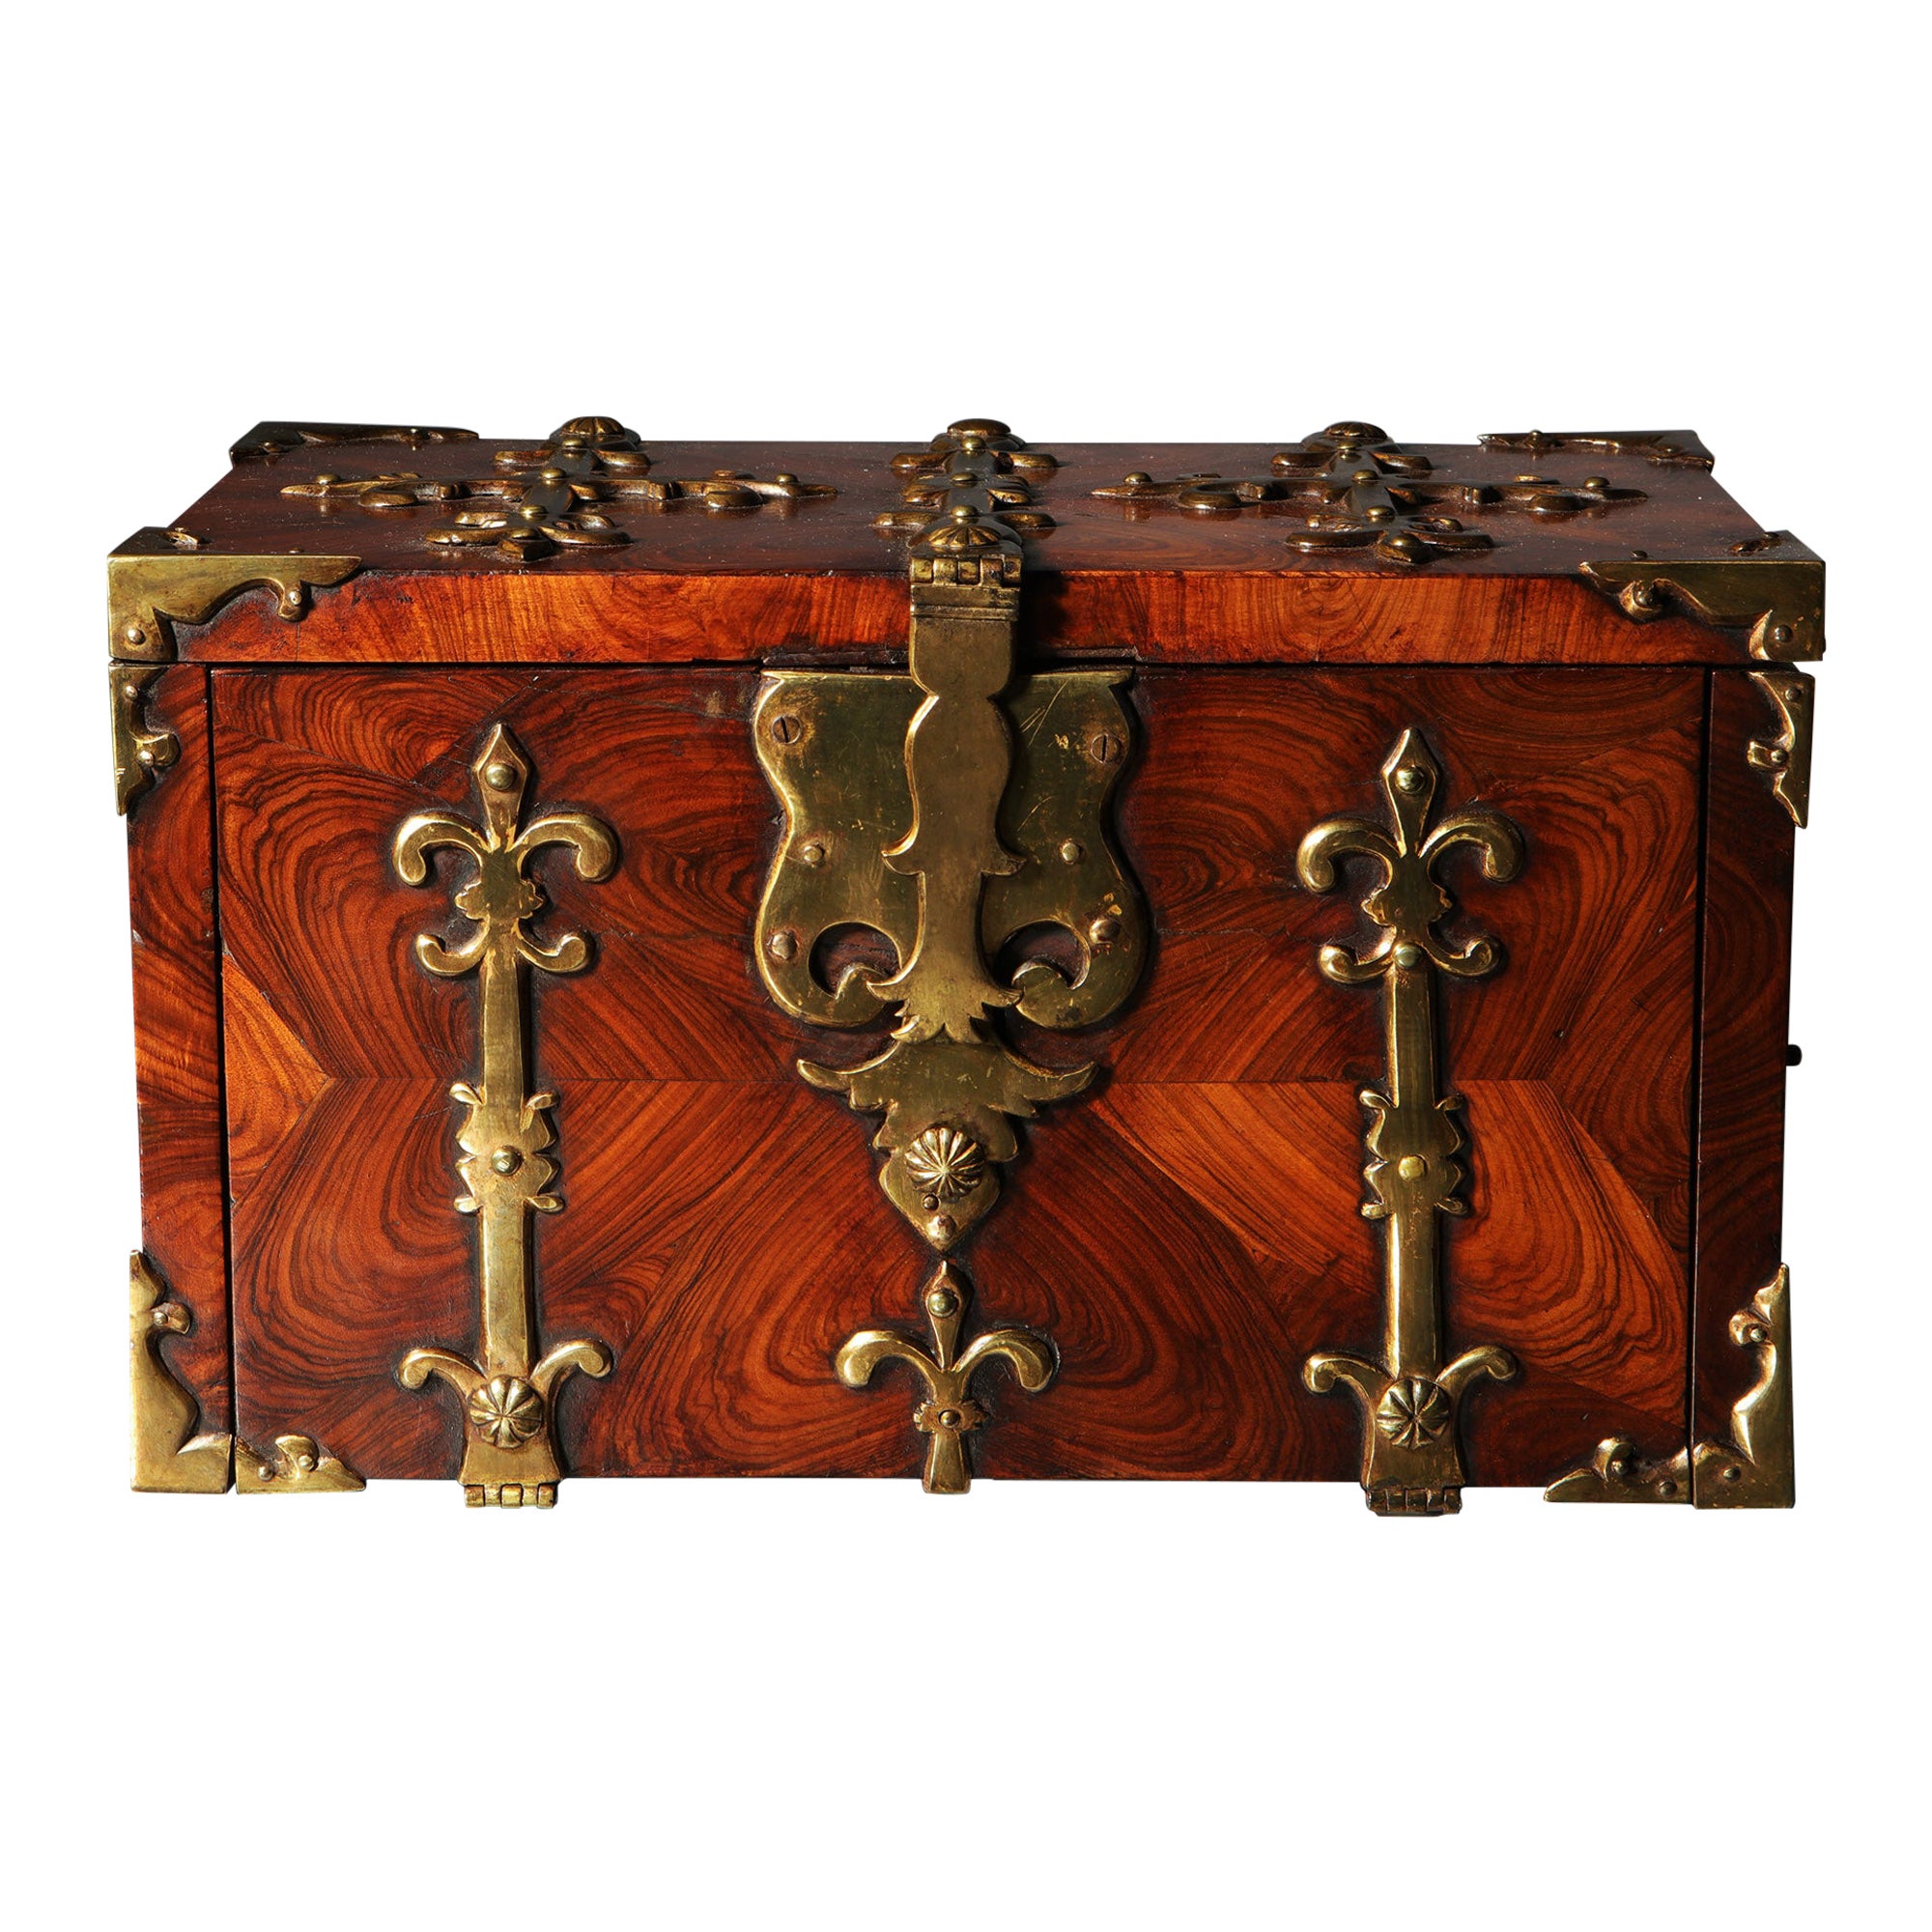 A Fine 17th C. William and Mary Kingwood Strongbox or Coffre Fort, Circa 1690 For Sale